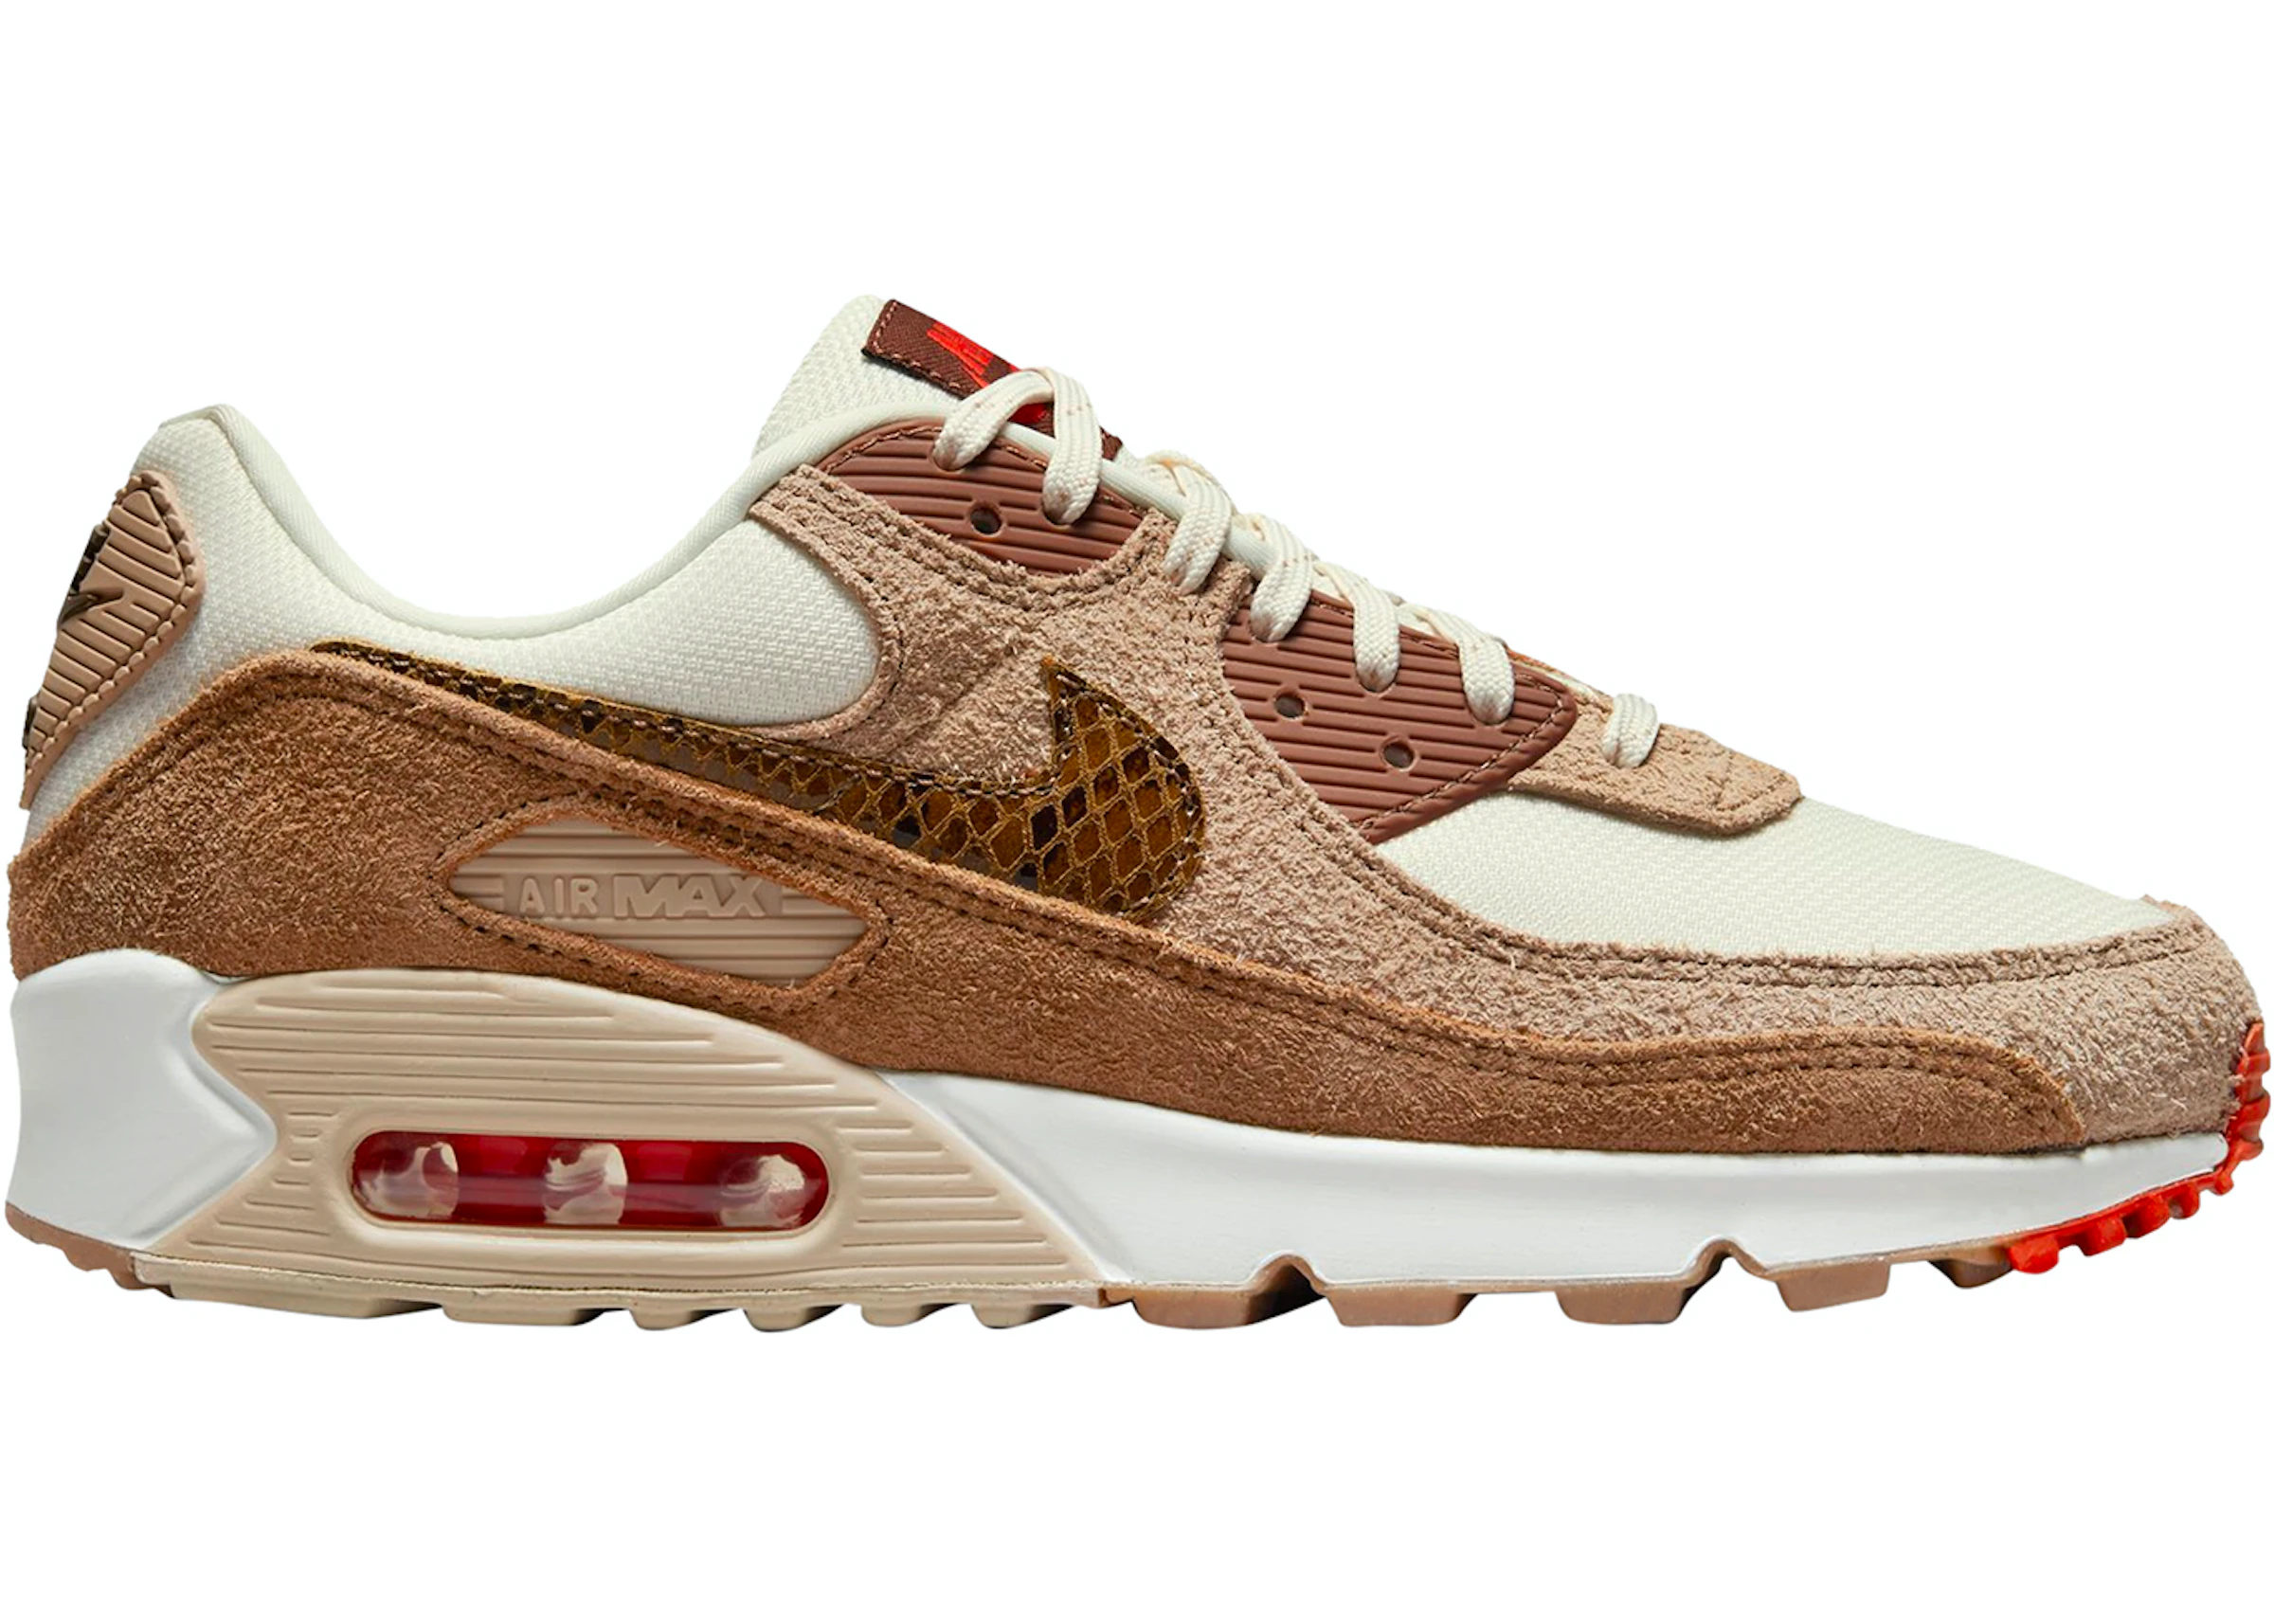 Rotate Tropical gang Nike Air Max 90 SE Pale Ivory Snakeskin Swoosh (W) - DX9502-100 - US